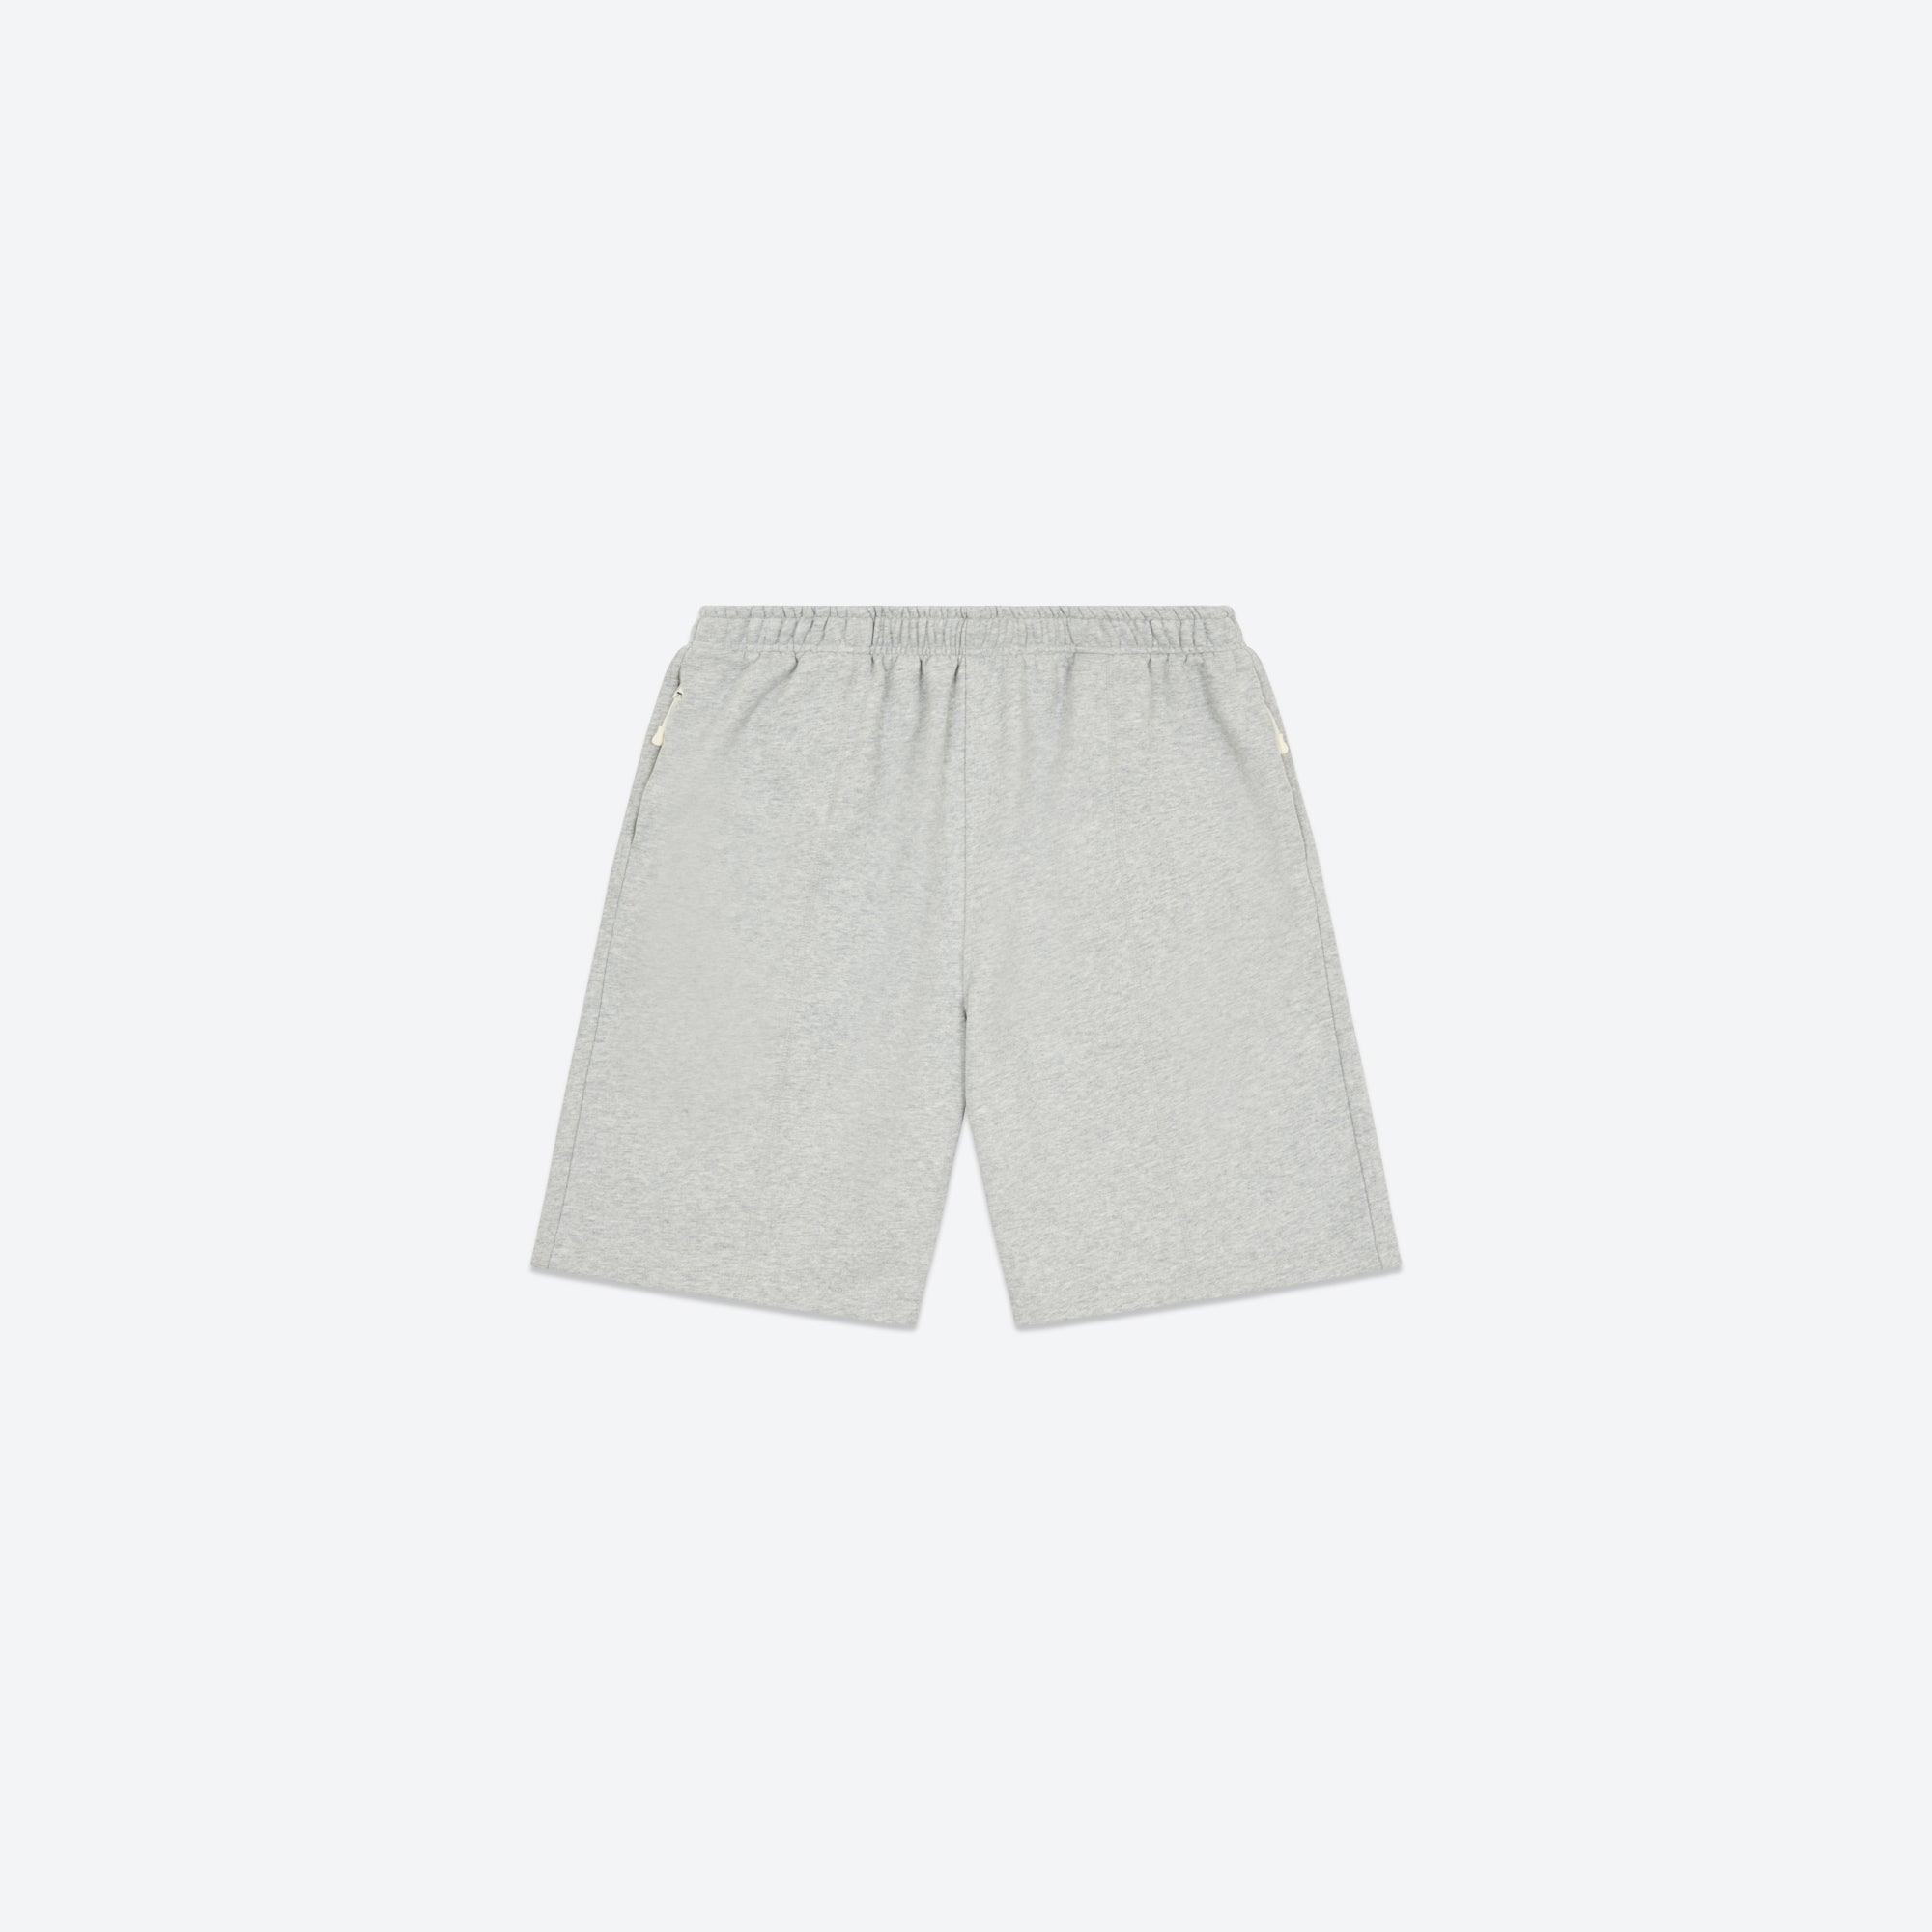 Alfred's Apartment - Trusted Sweatshort - Marle